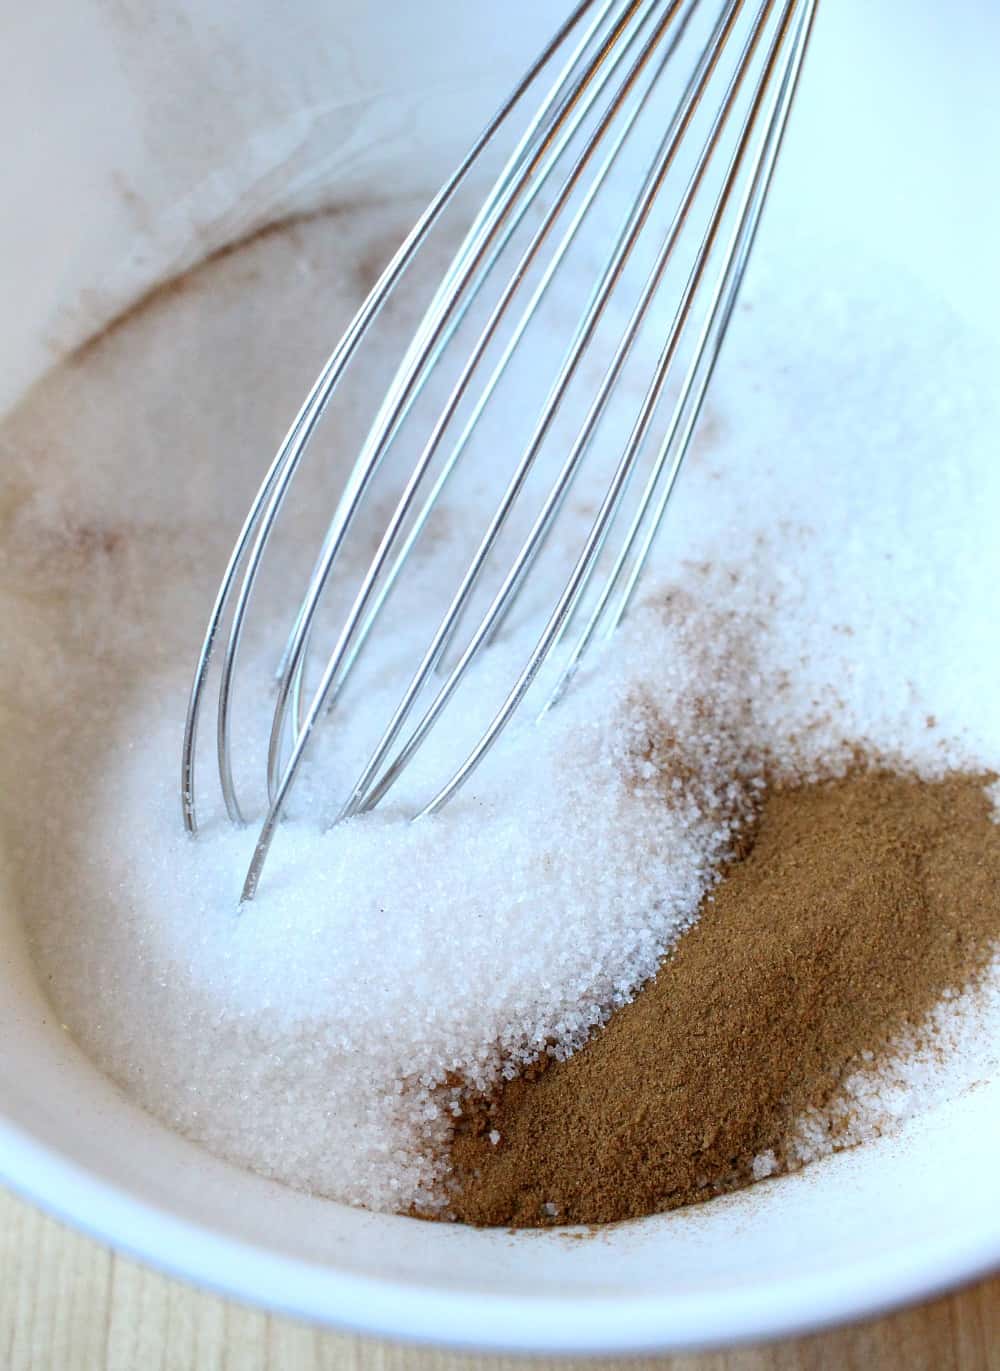 Cinnamon and sugar in a white bowl with a whisk.